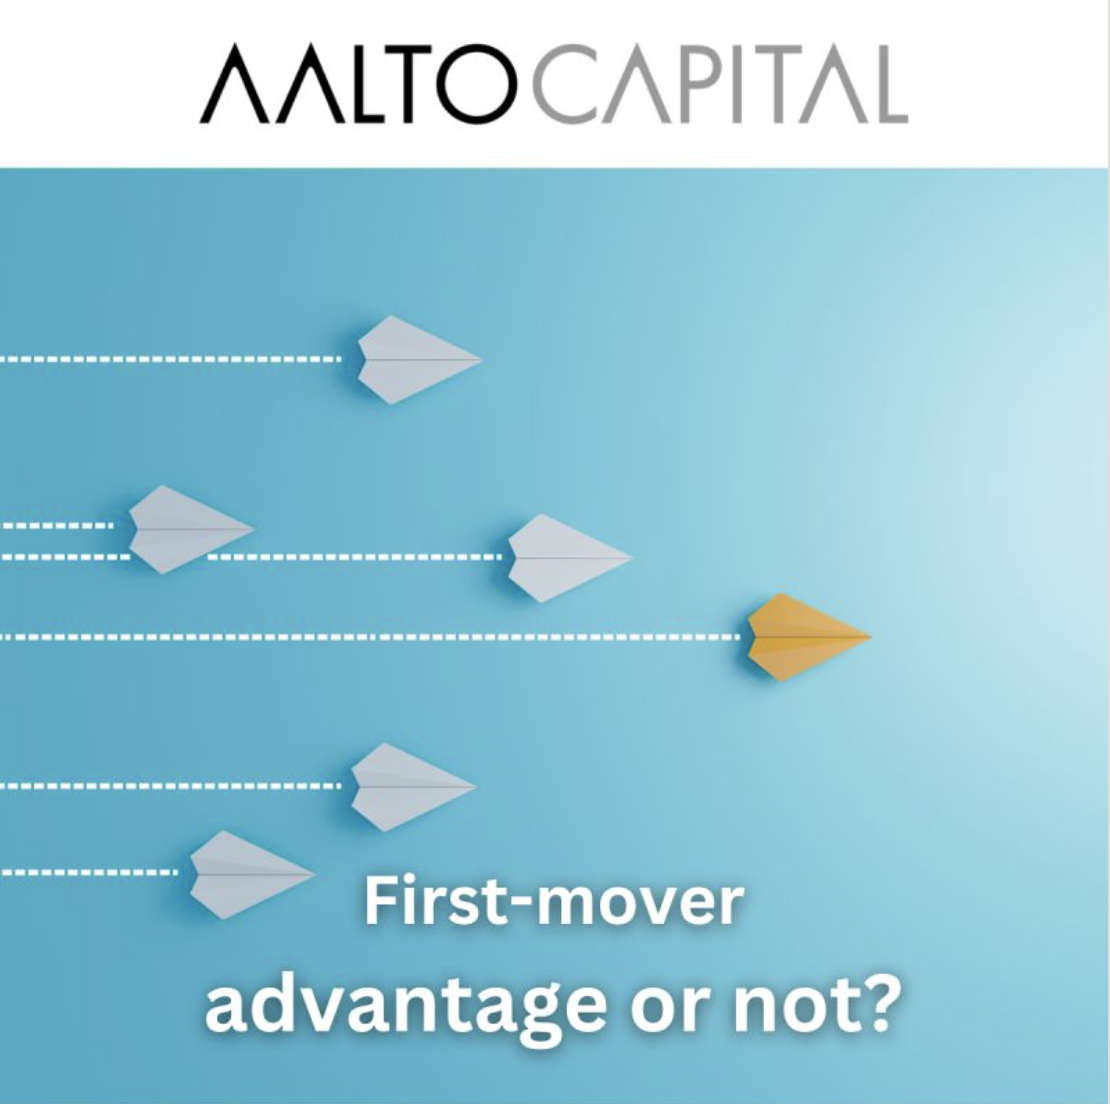 First mover – advantage or not?